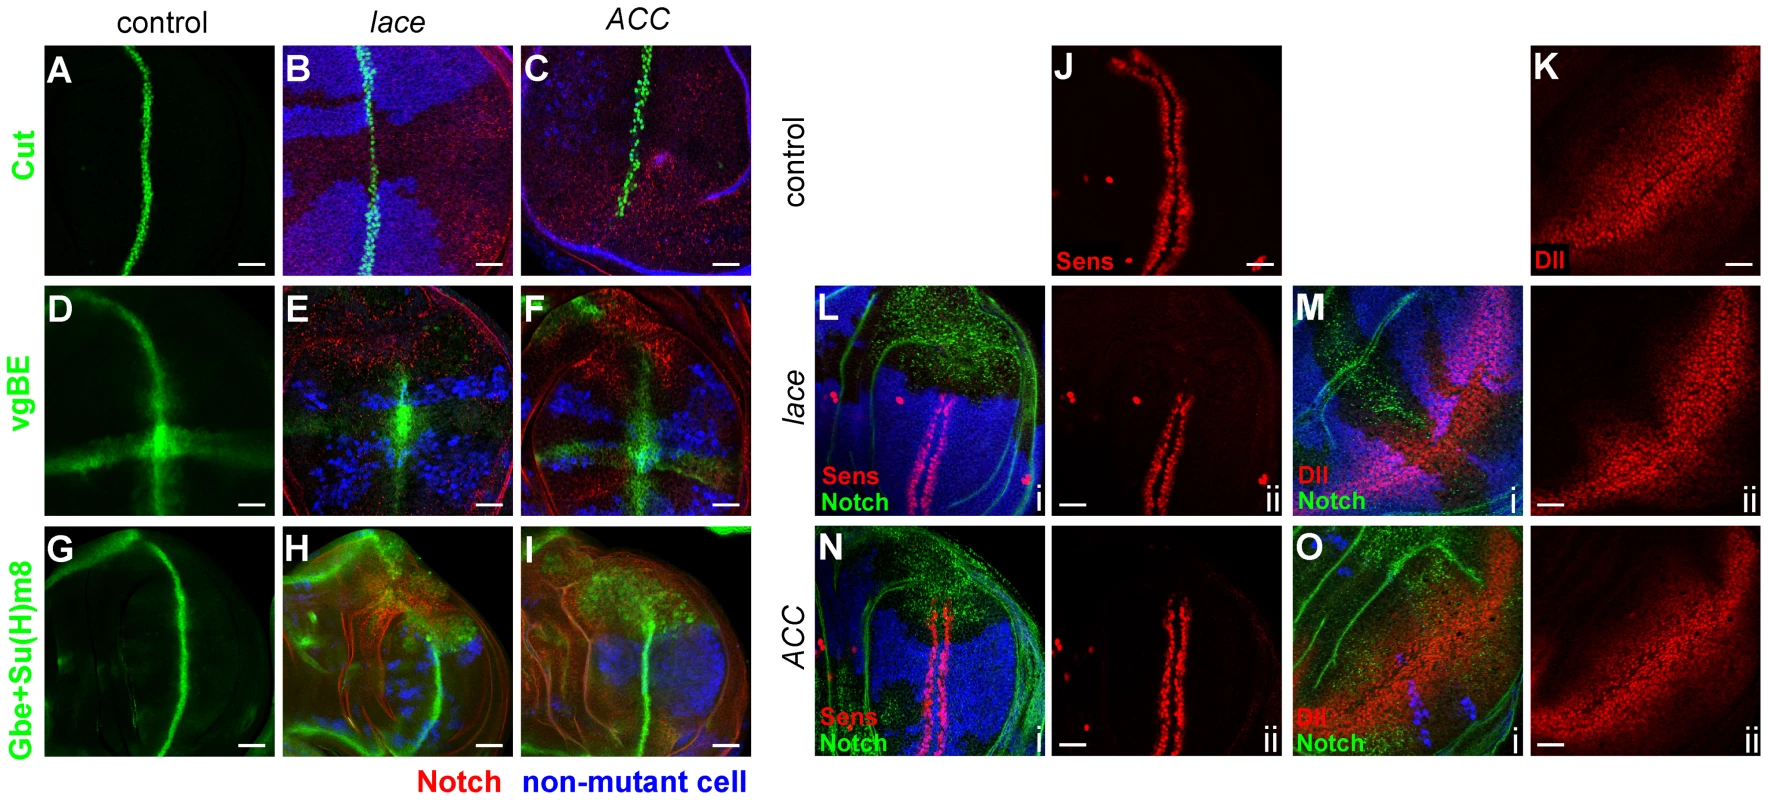 Notch and Wingless signaling abnormalities in <i>lace</i> and <i>ACC</i> mutants.